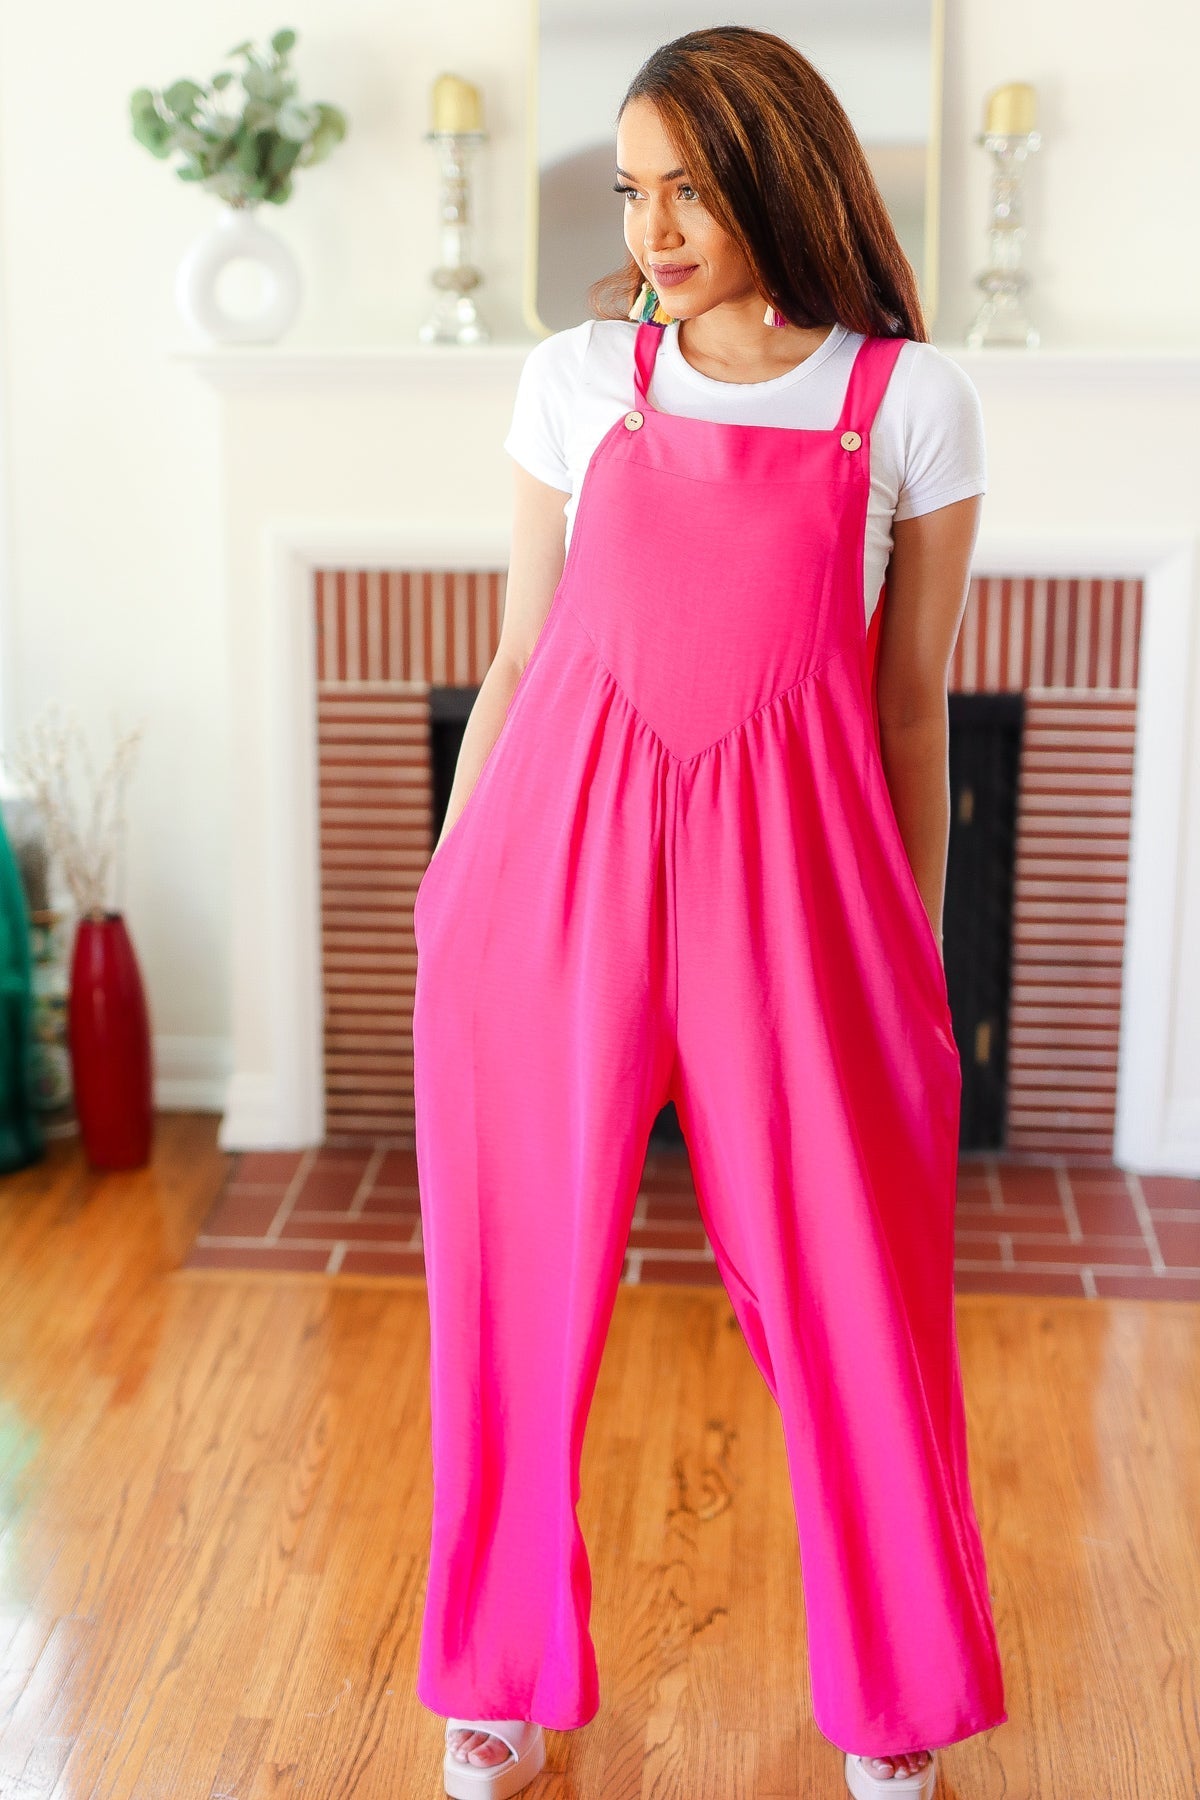 Shop Summer Dreaming Wide Leg Overalls-Jumpsuit at Ruby Joy Boutique, a Women's Clothing Store in Pickerington, Ohio